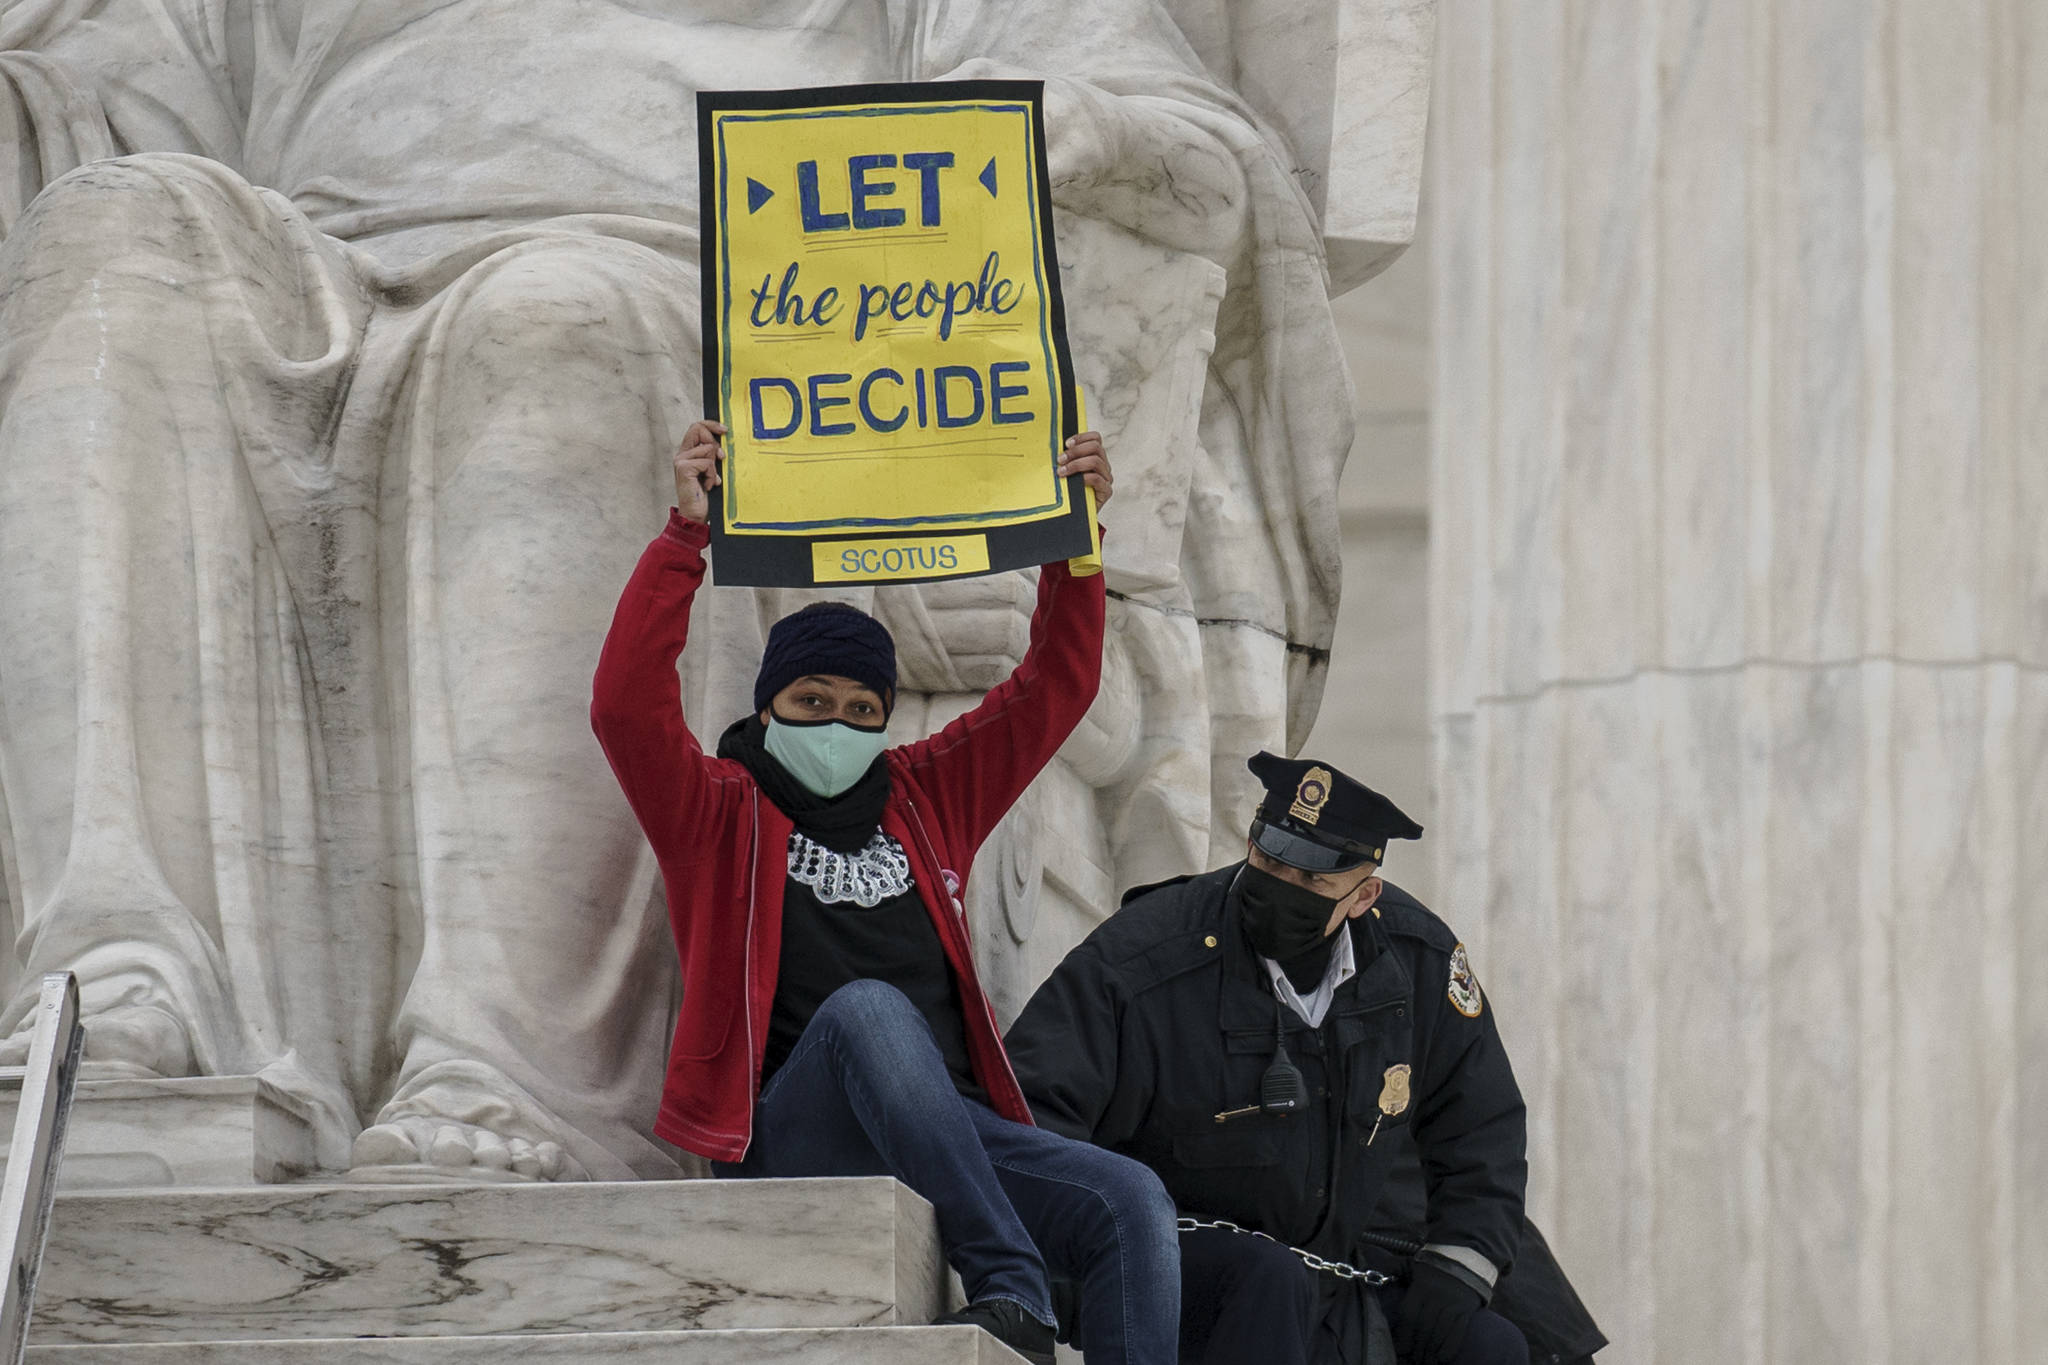 A protester opposed to the Senate's race to confirm Amy Coney Barrett is removed by police after chaining themselves to a railing and holding a sign while sitting atop the statue Contemplation of Justice, at the Supreme Court building in Washington, Sunday, Oct. 25, 2020. (AP Photo / J. Scott Applewhite)